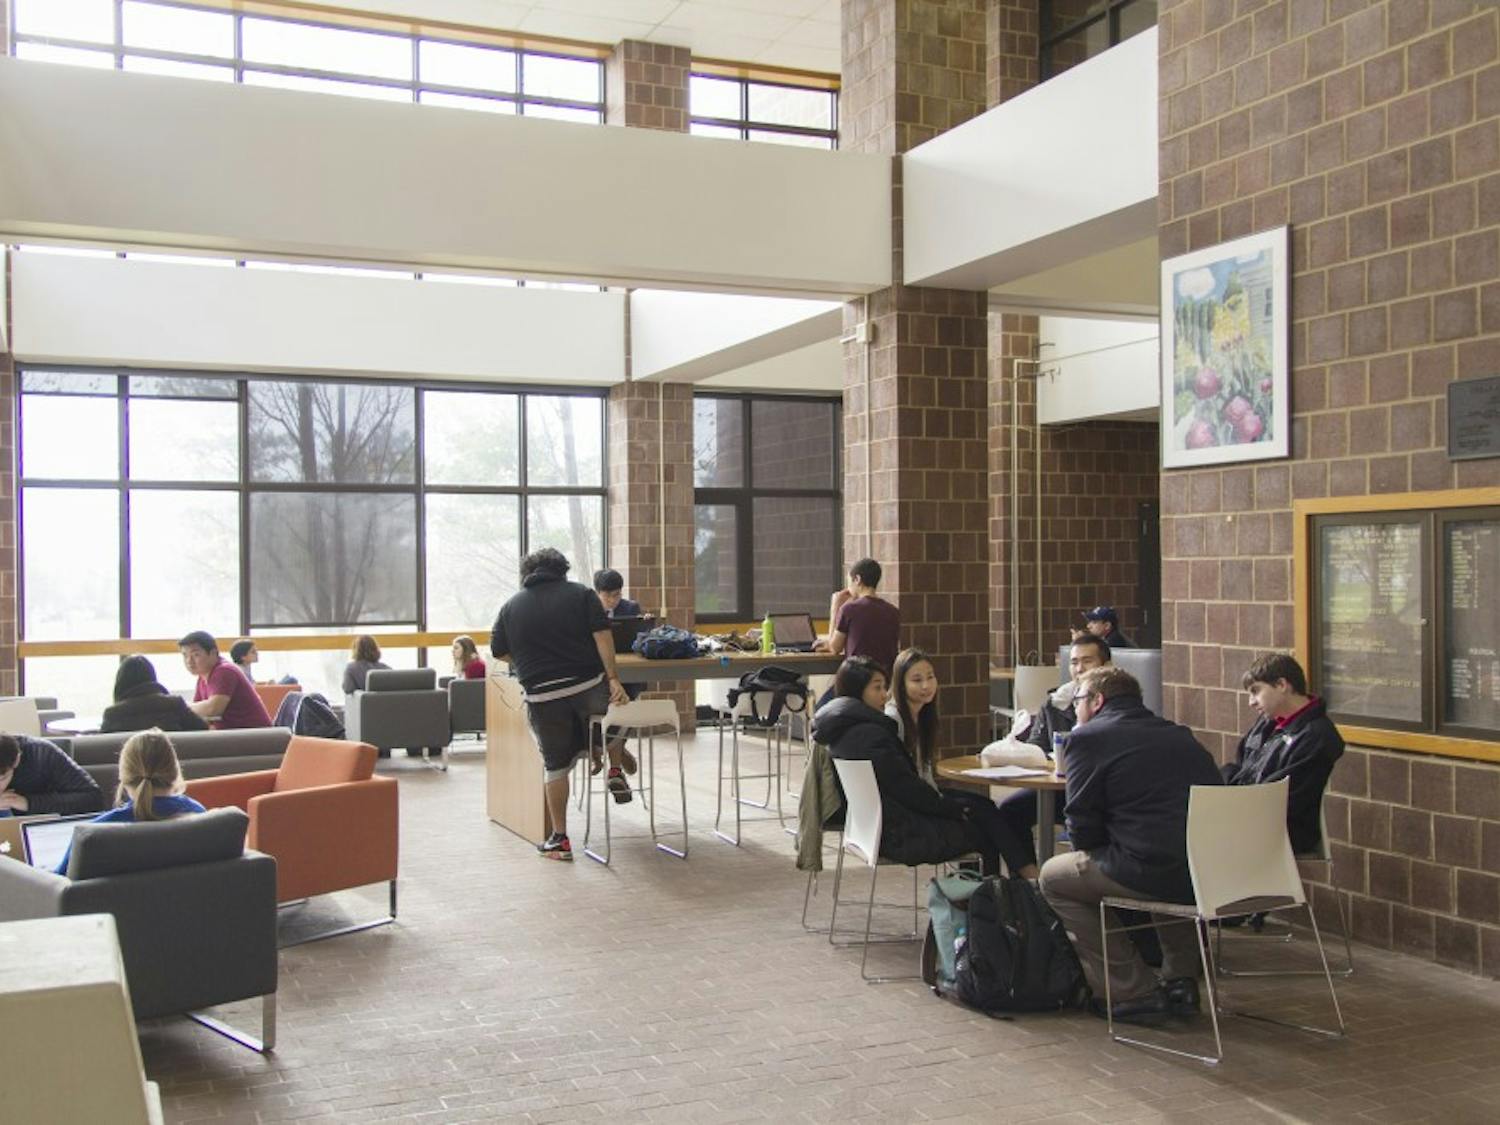 The Park Lounge is a perfect place to study because it’s quiet and away from the overcrowded libraries.